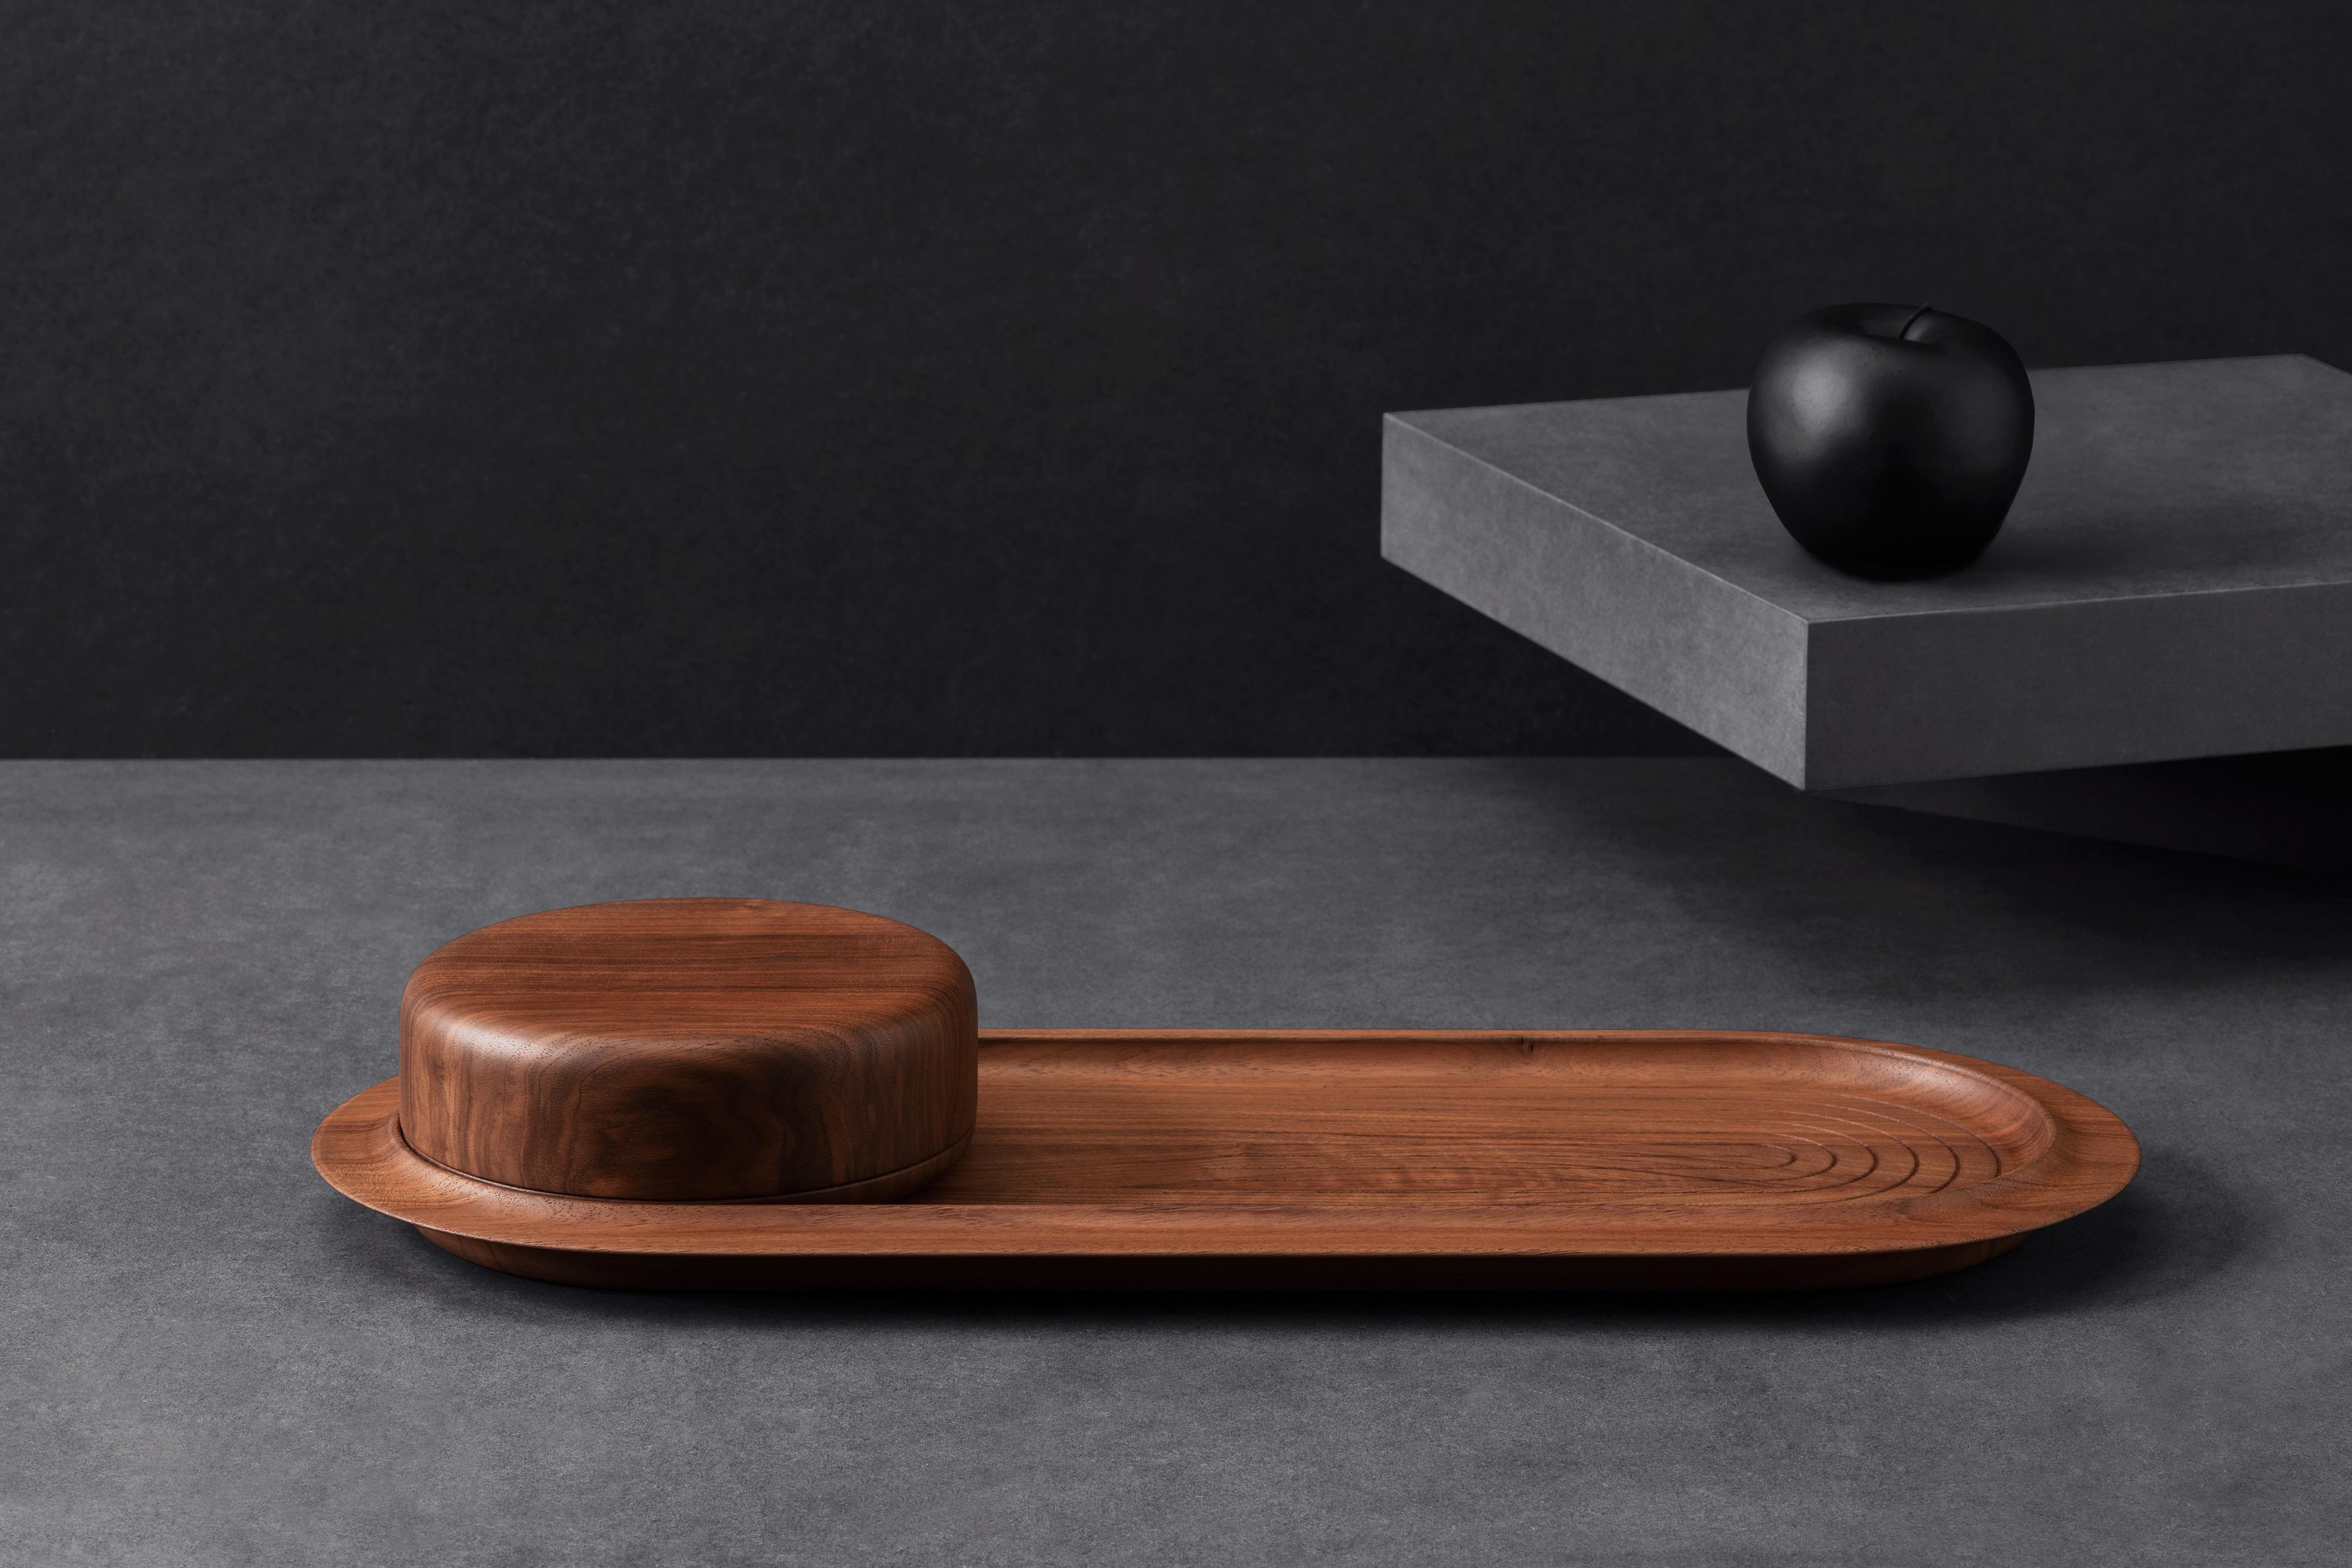 Walnut Do-Ri tray by Matthias Scherzinger
Dimensions: L 47.4 x W 19.8 x H 6.5 cm
Materials: Europe walnut lacquered
 inside tin: hard wax

Also available in olive ash and Europe walnut.

It all began in Glottertal, Germany. Born in 1978,